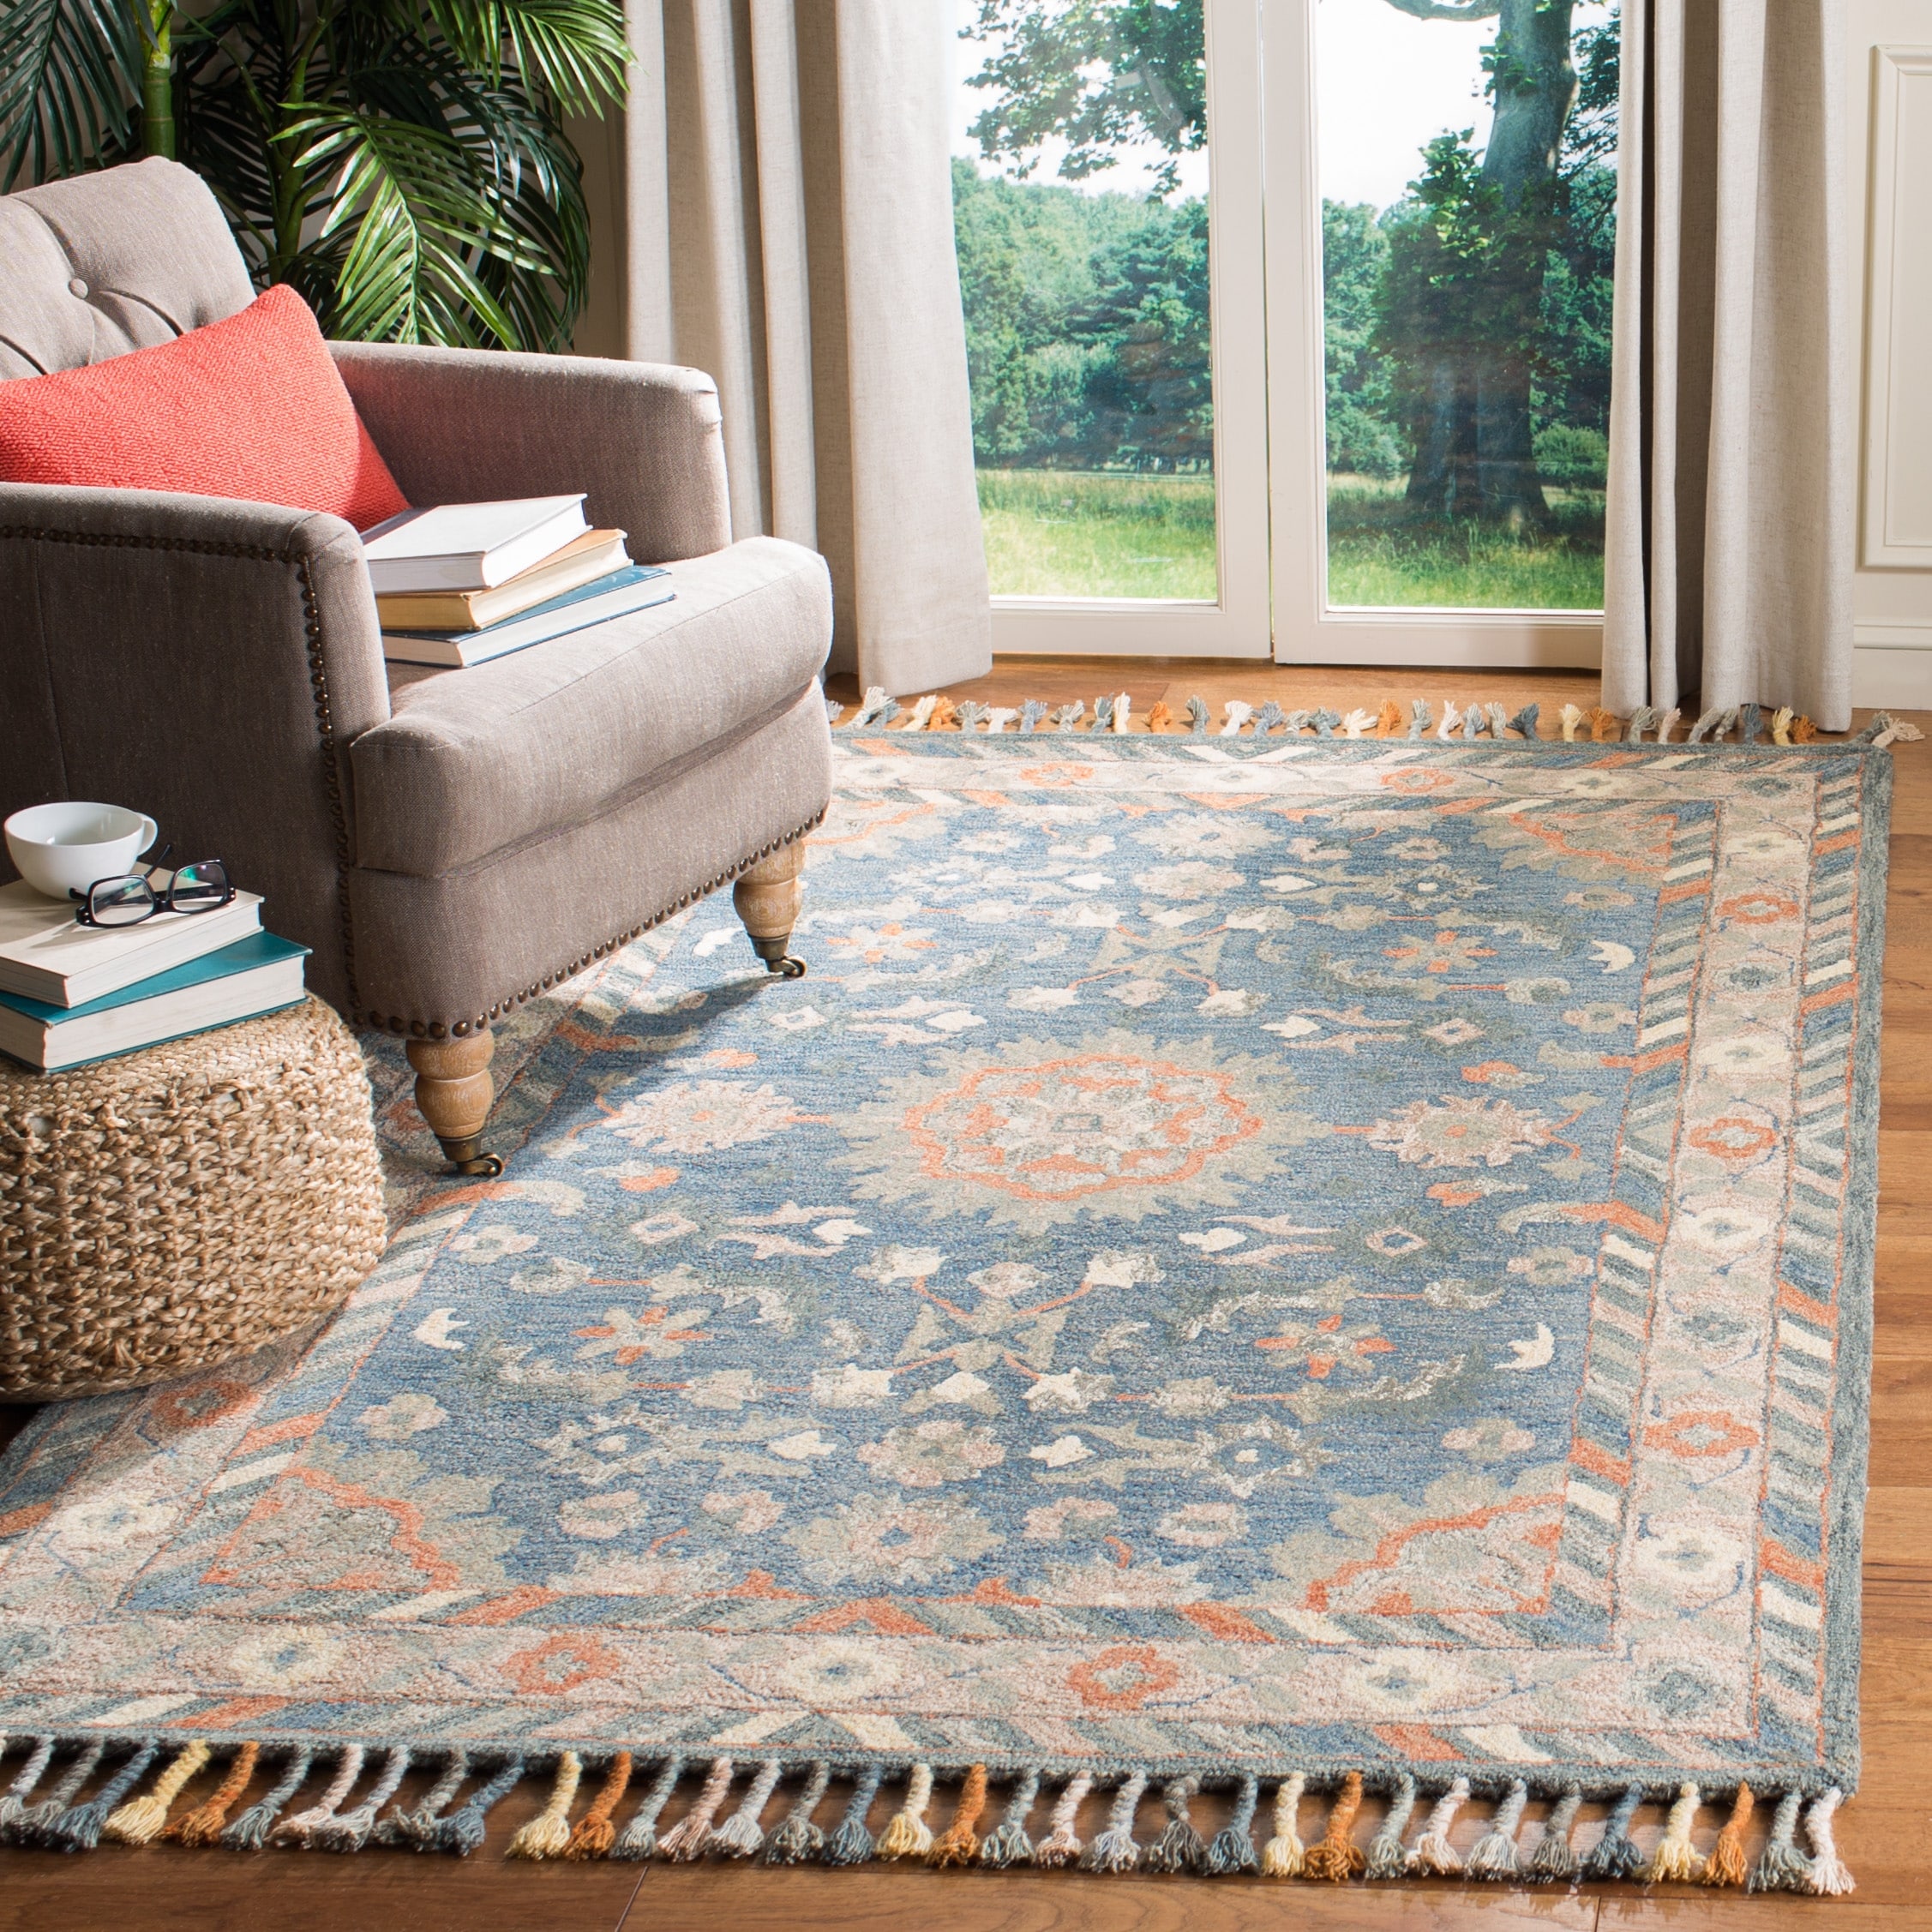 2' X 3' Blue Floral Botanical Traditional Rectangle Contains Latex Handmade Hand-Tufted Navy/Brown Wool Area Rug